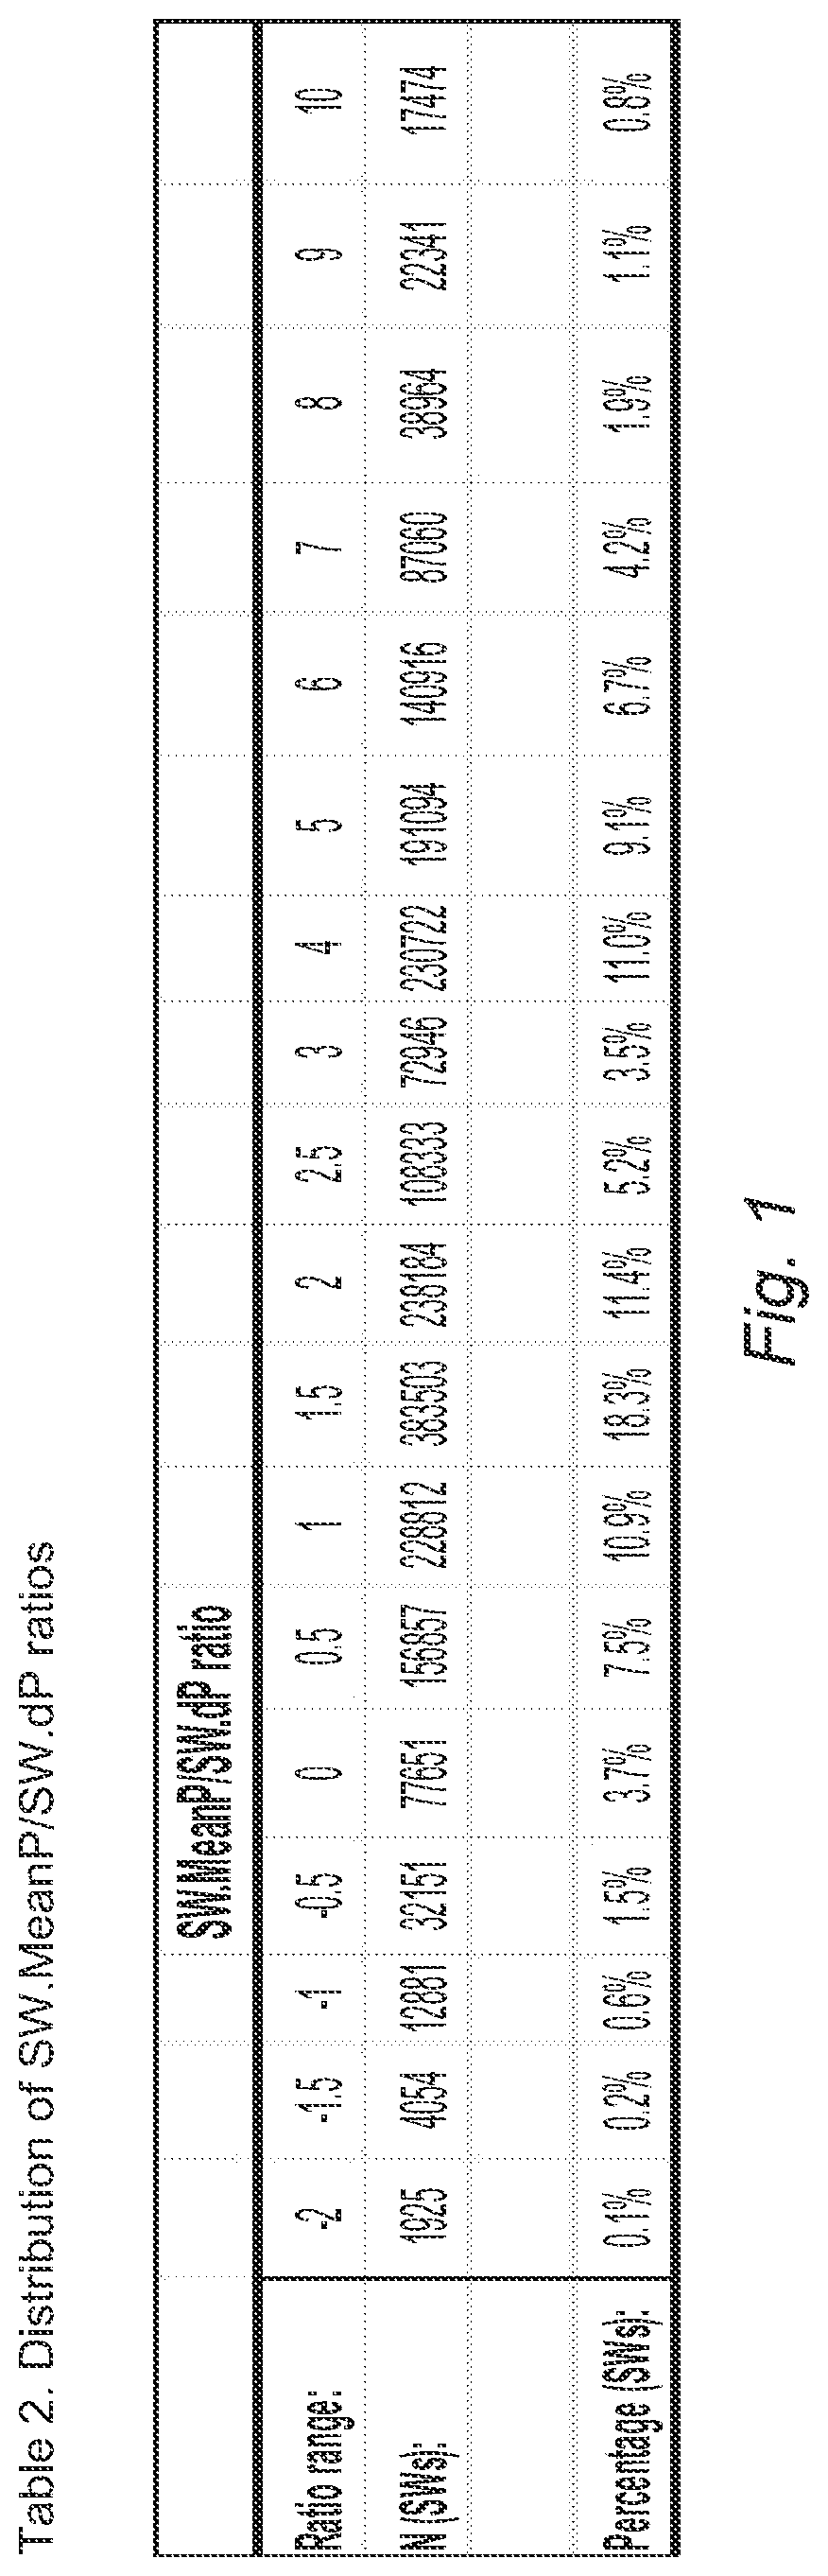 System and method for remote assessment and correction of baseline pressure instability of medical pressure sensors